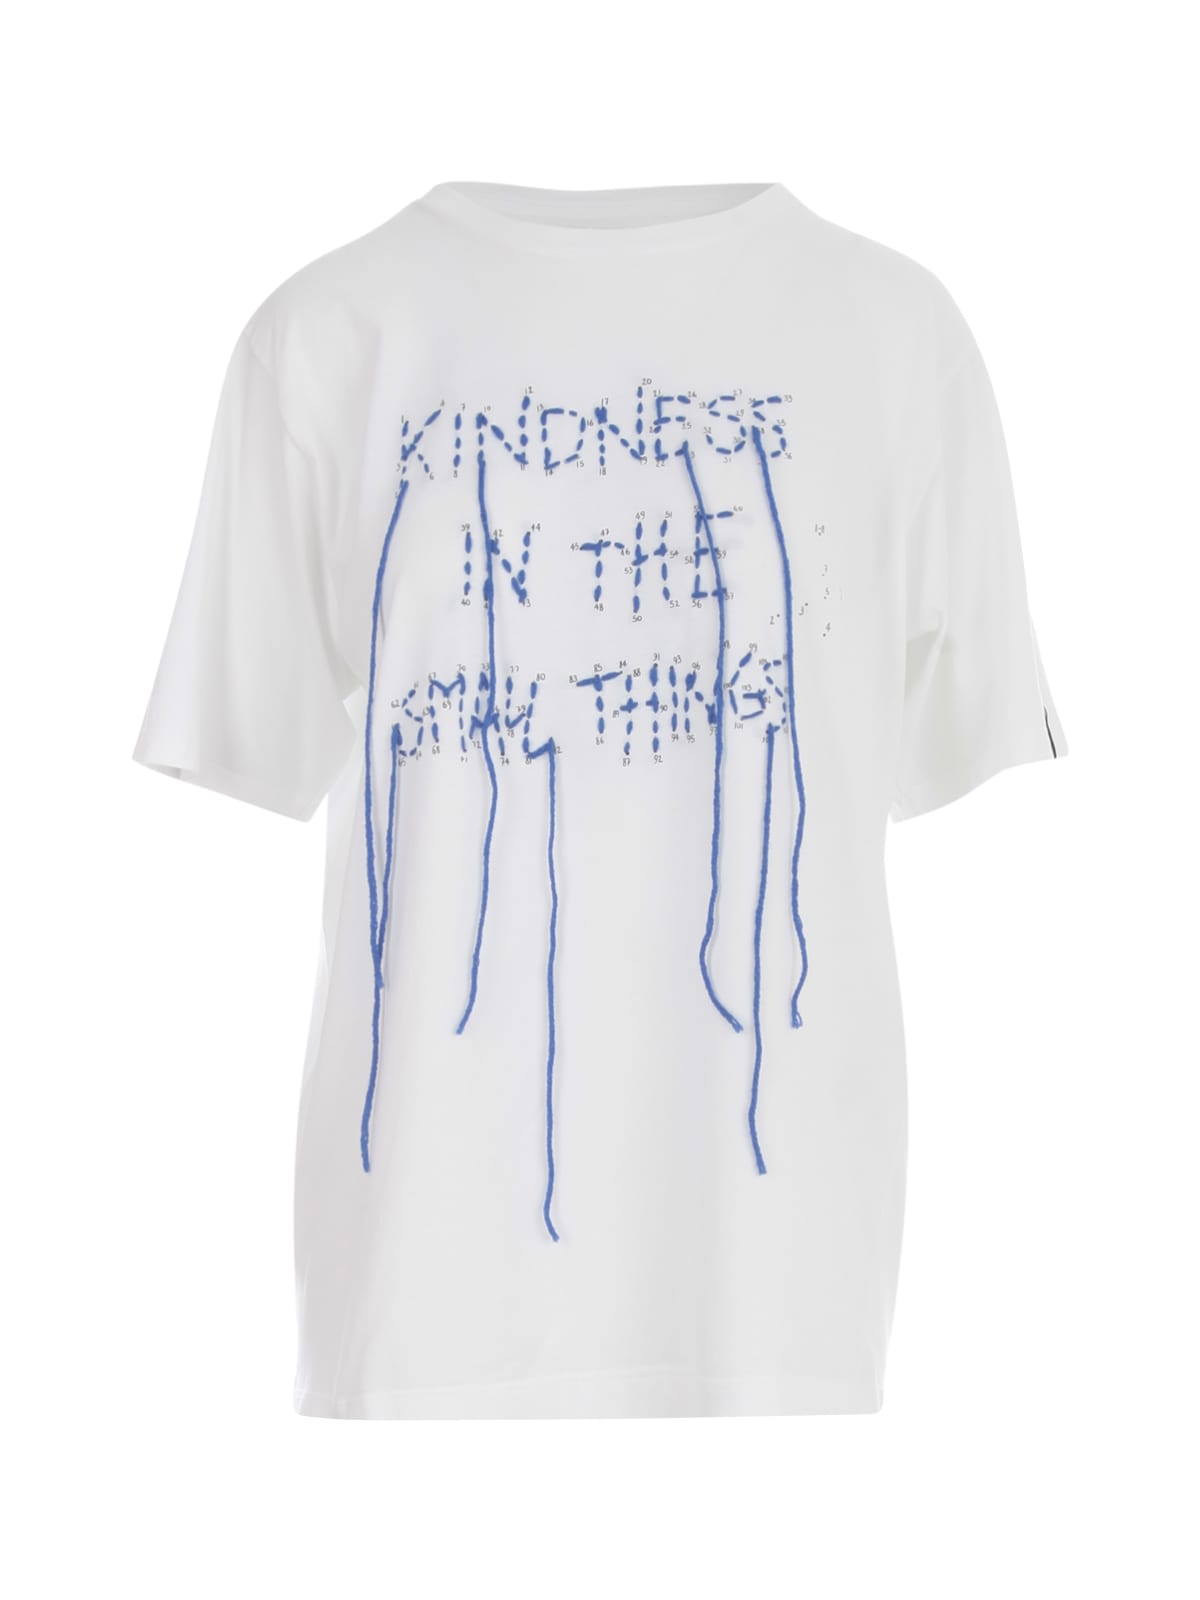 Golden Goose T-shirt Aira Boyfriend S/s Kindness In The Small Things/water/d.i.y.